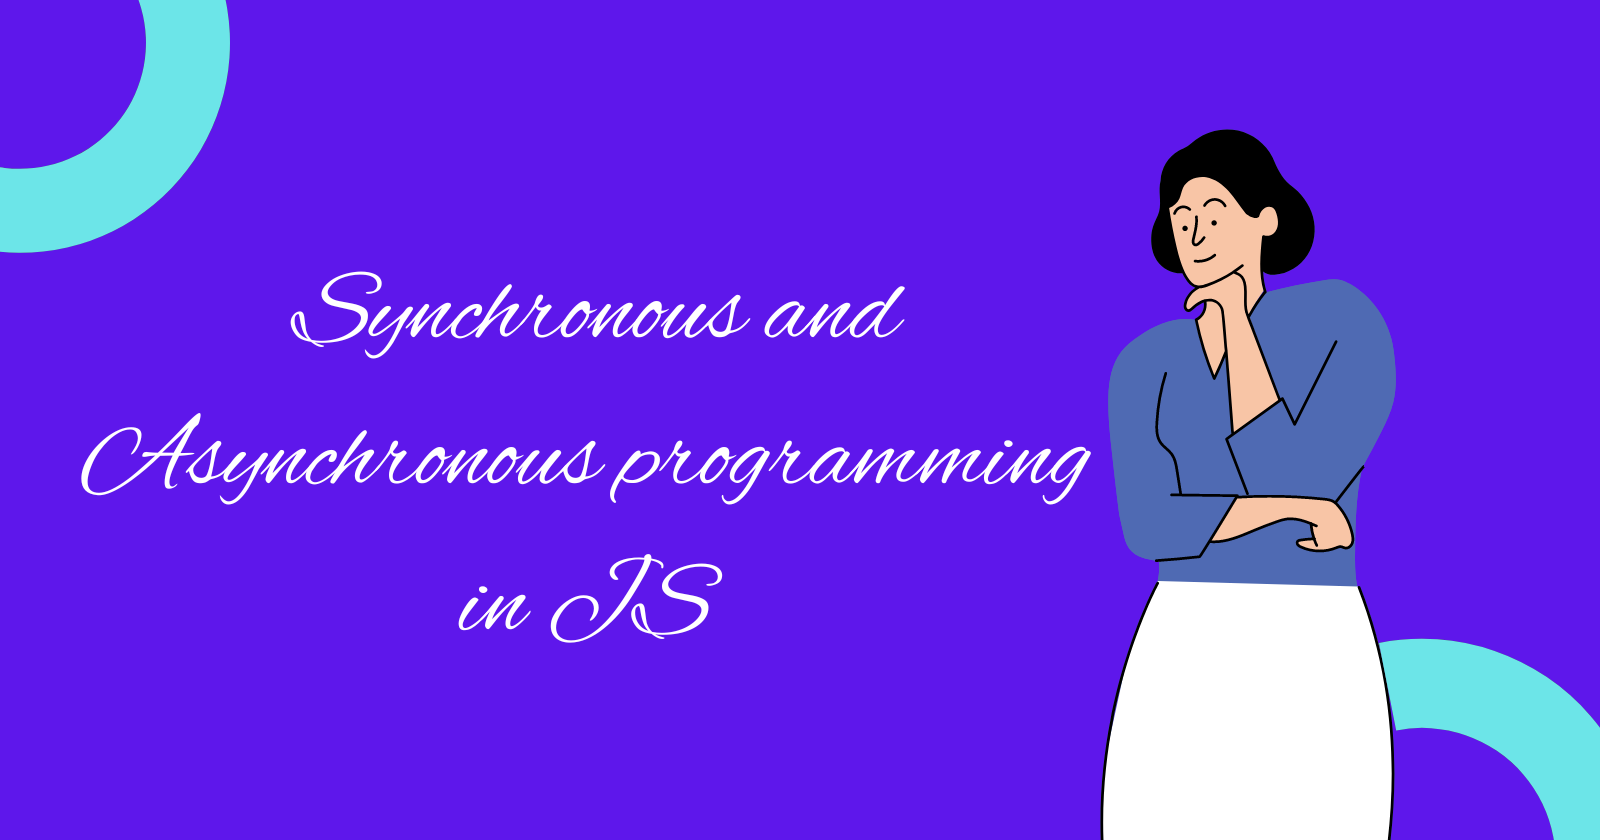 What is Synchronous and Asynchronous programming in JS